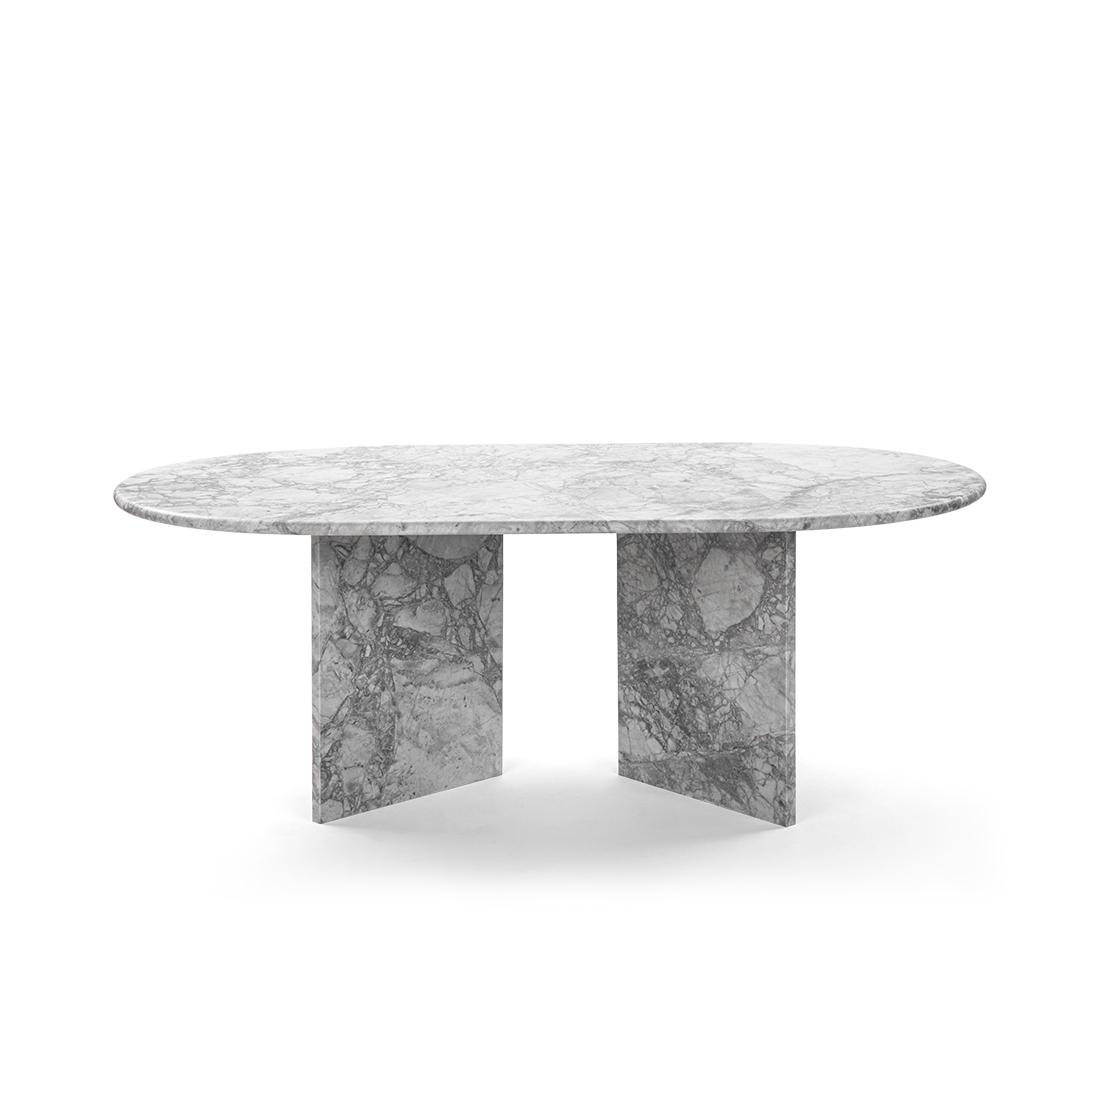 23% off Laurent Oval White Marble Coffee Table with Angled Base